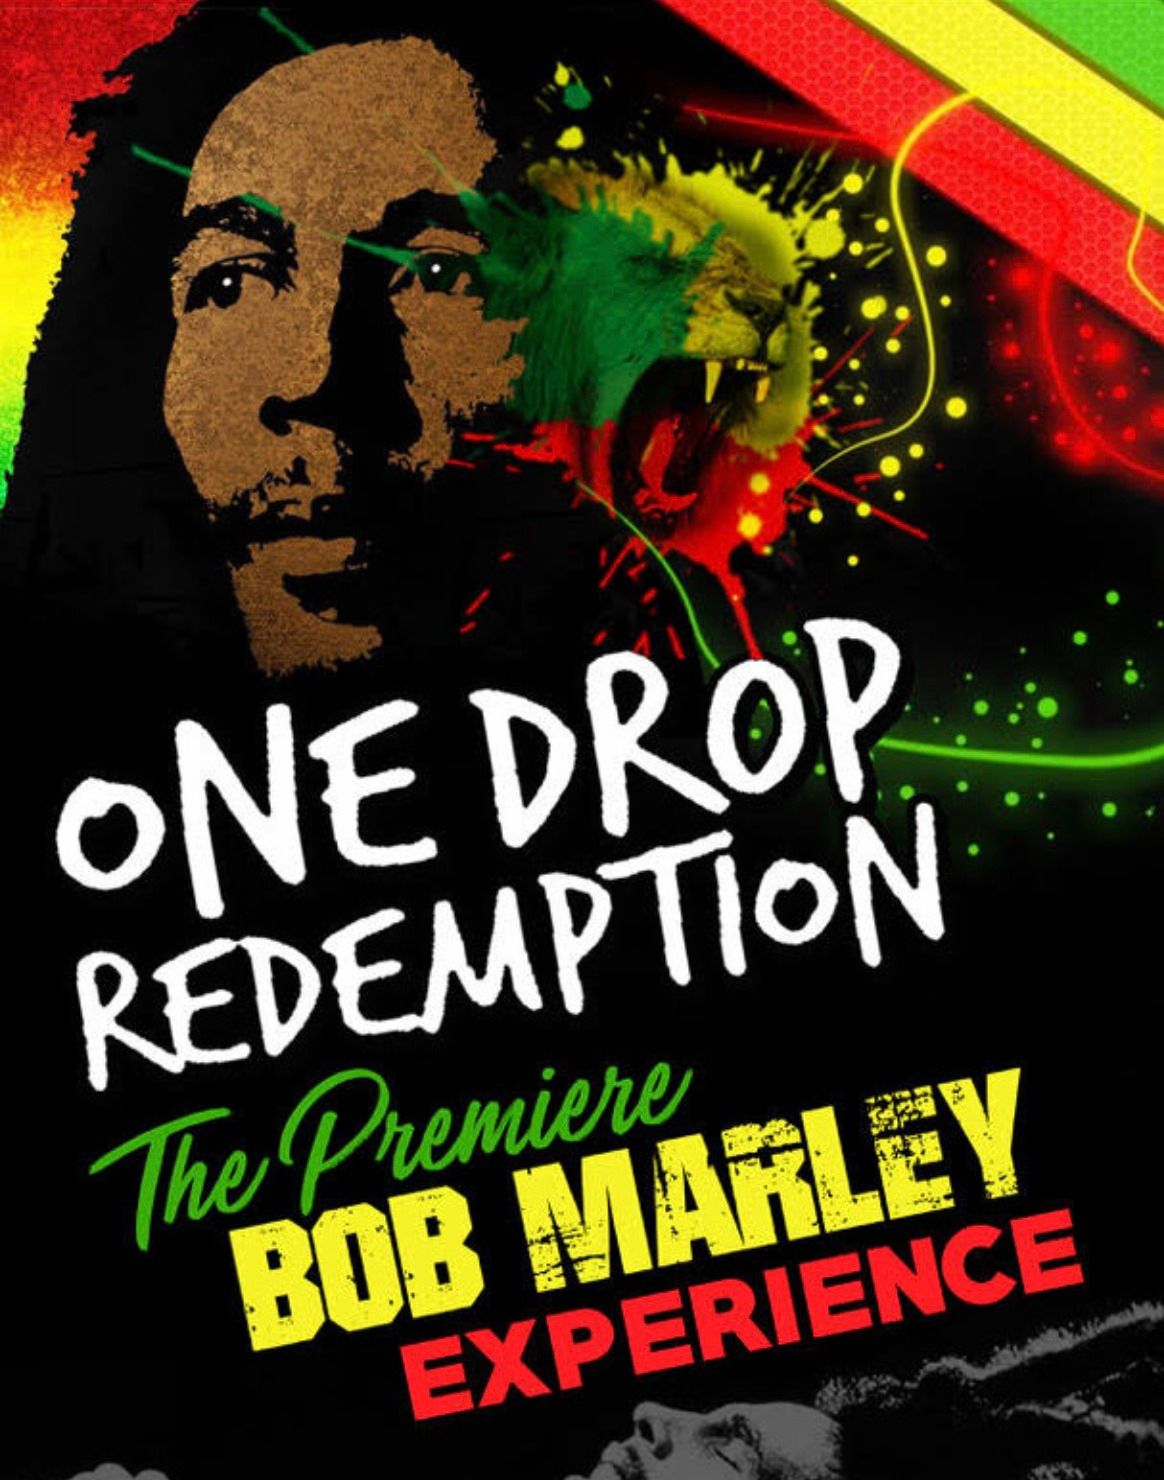 One Drop Redemption - The Premiere Bob Marley Experience